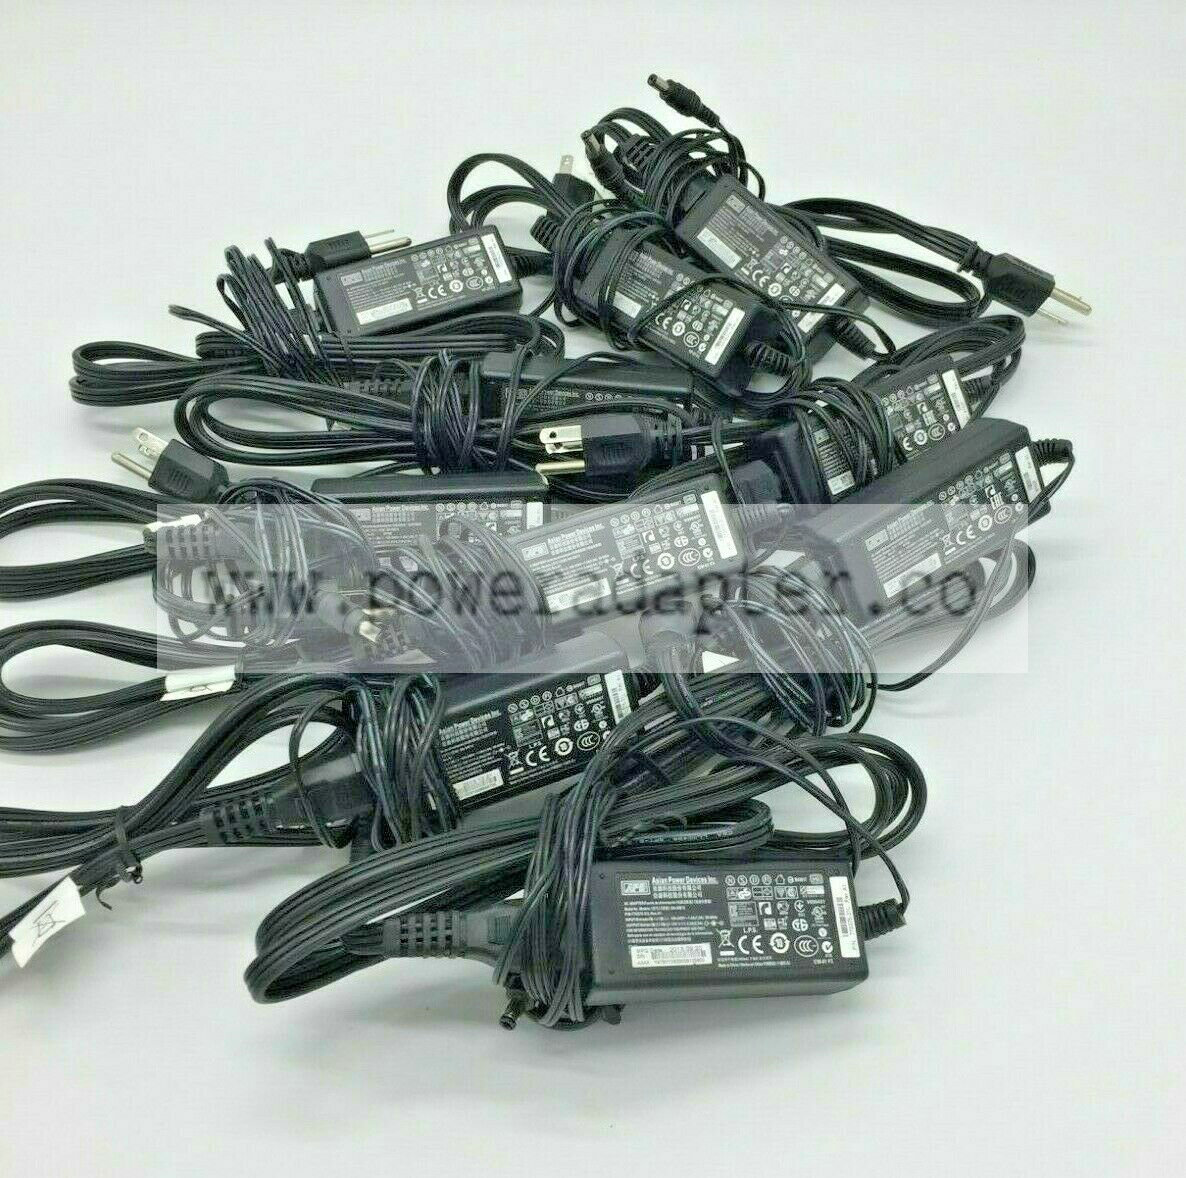 lot of 10 WYSE APD AC Adapter DA-30E12 770375-31L 12V 2.5A 9y62f charger power Output Voltage(s): 12 V Brand: WYSE T - Click Image to Close